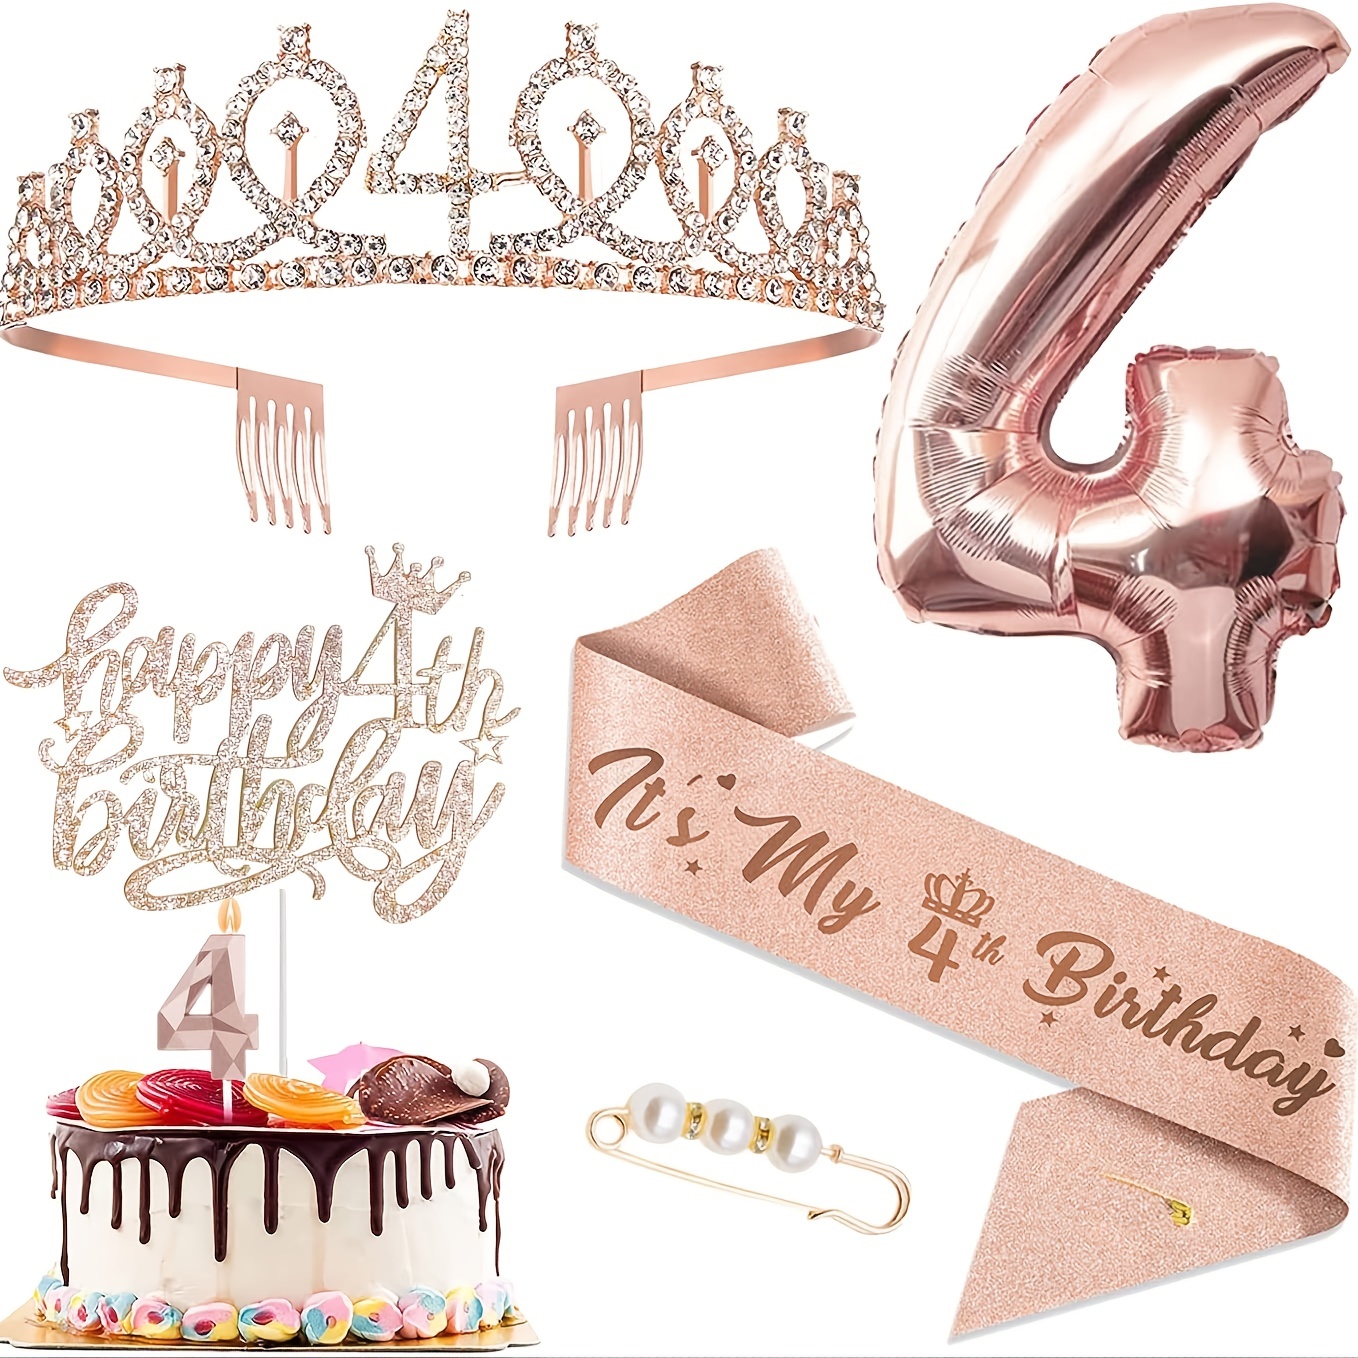 5th Birthday Decorations for Girl, Including 5th Birthday Crown/Tiara,  Sash, Happy Birthday Cake Toppers and Number 5 Candles, Pink Birthday Party